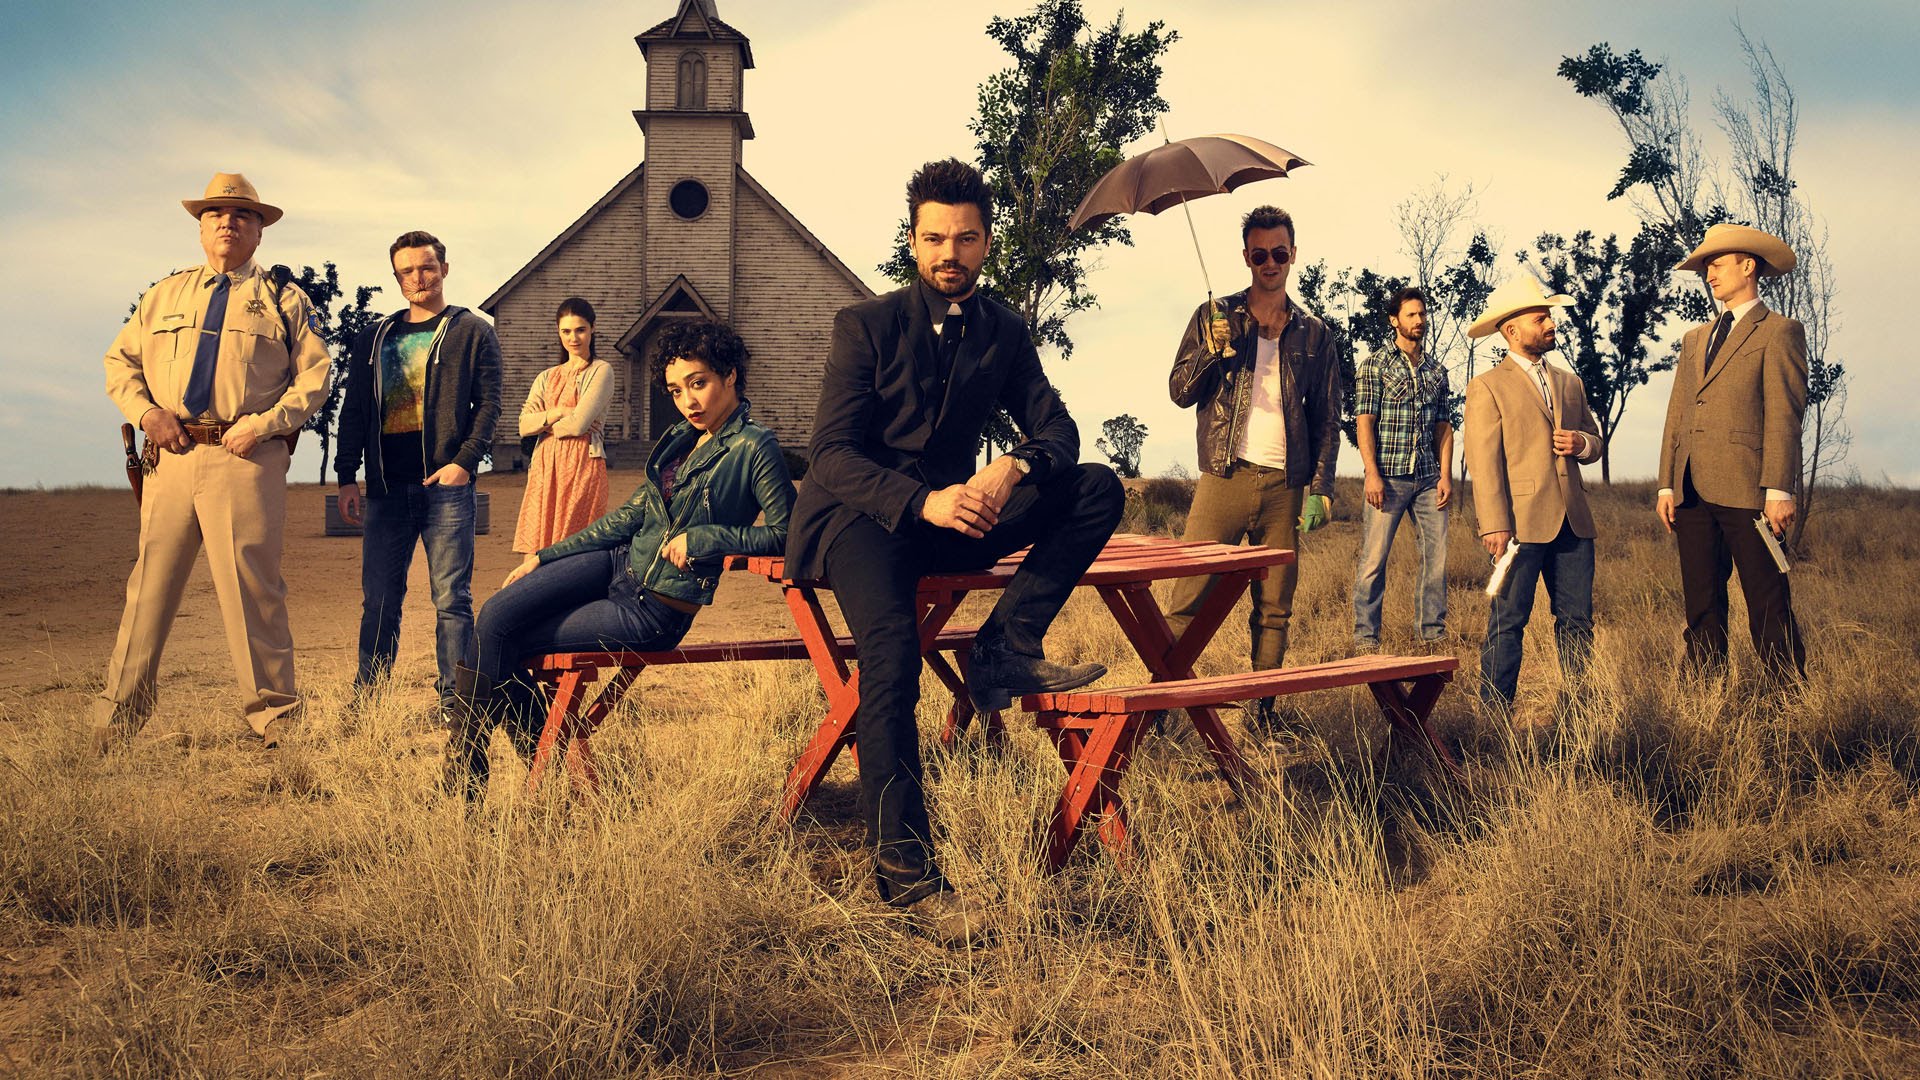 ‘preacher’ episode 2: is it holding up?